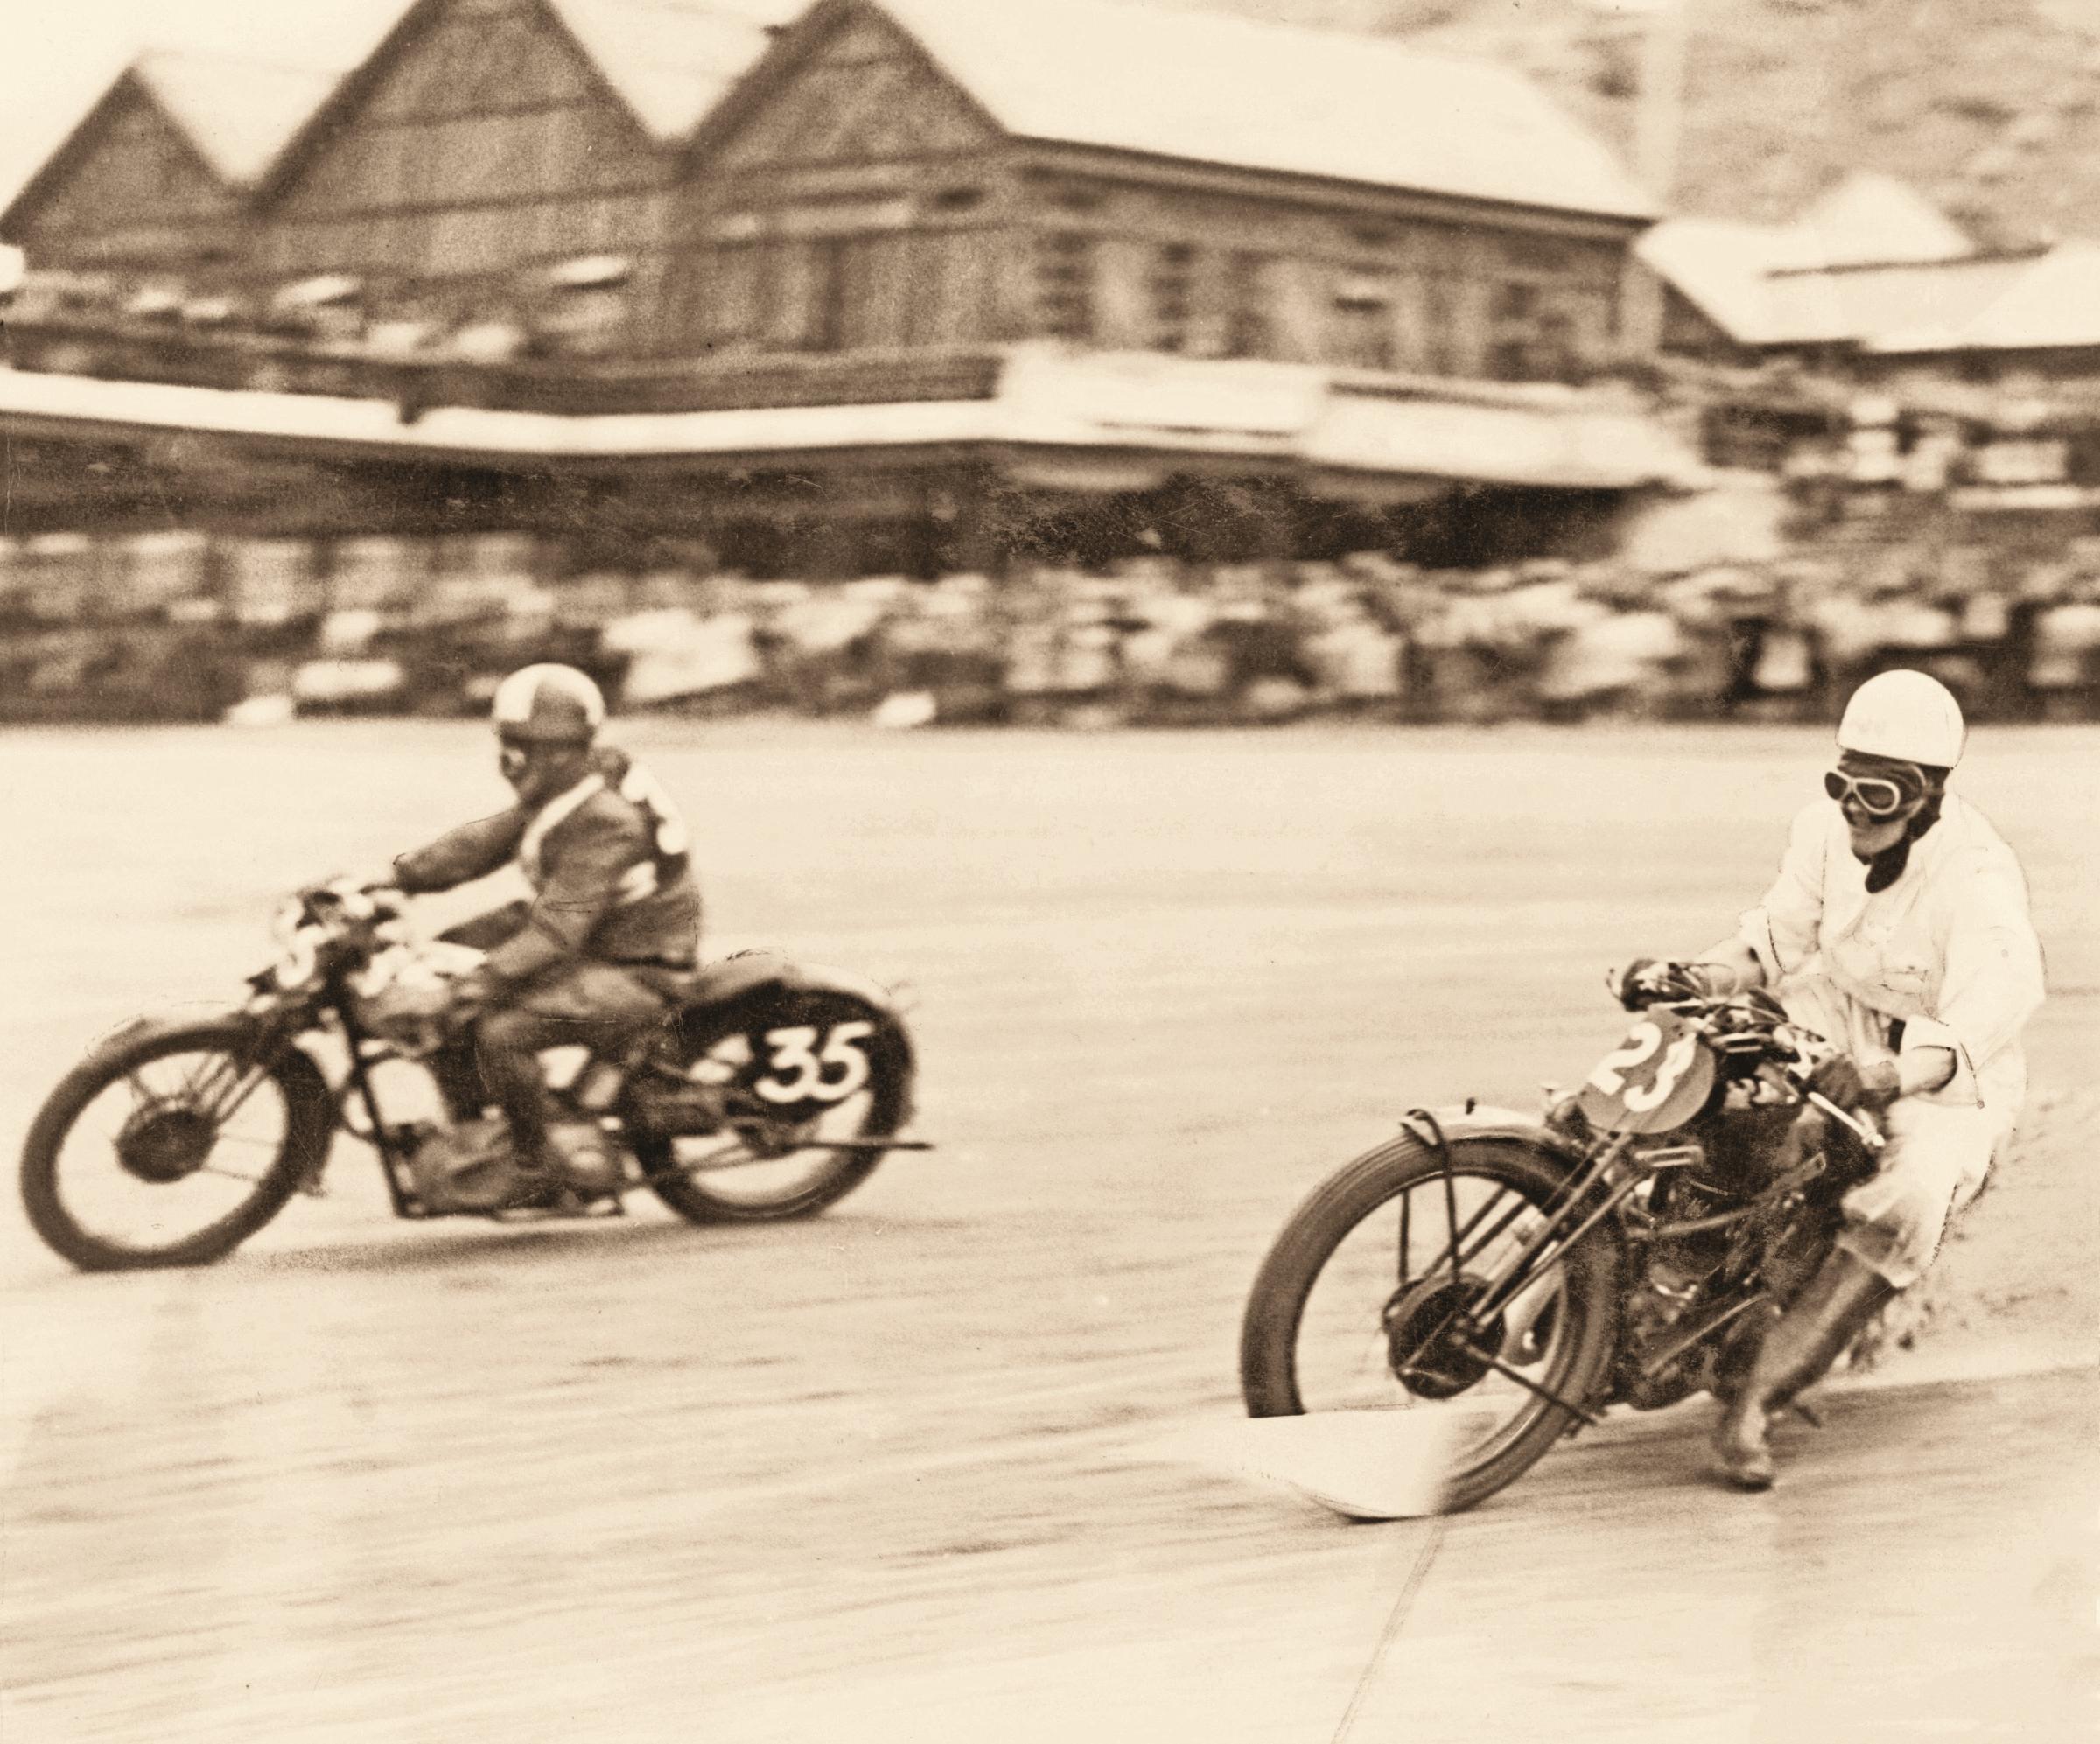 Beach racing by the pier at Saltburn in 1932